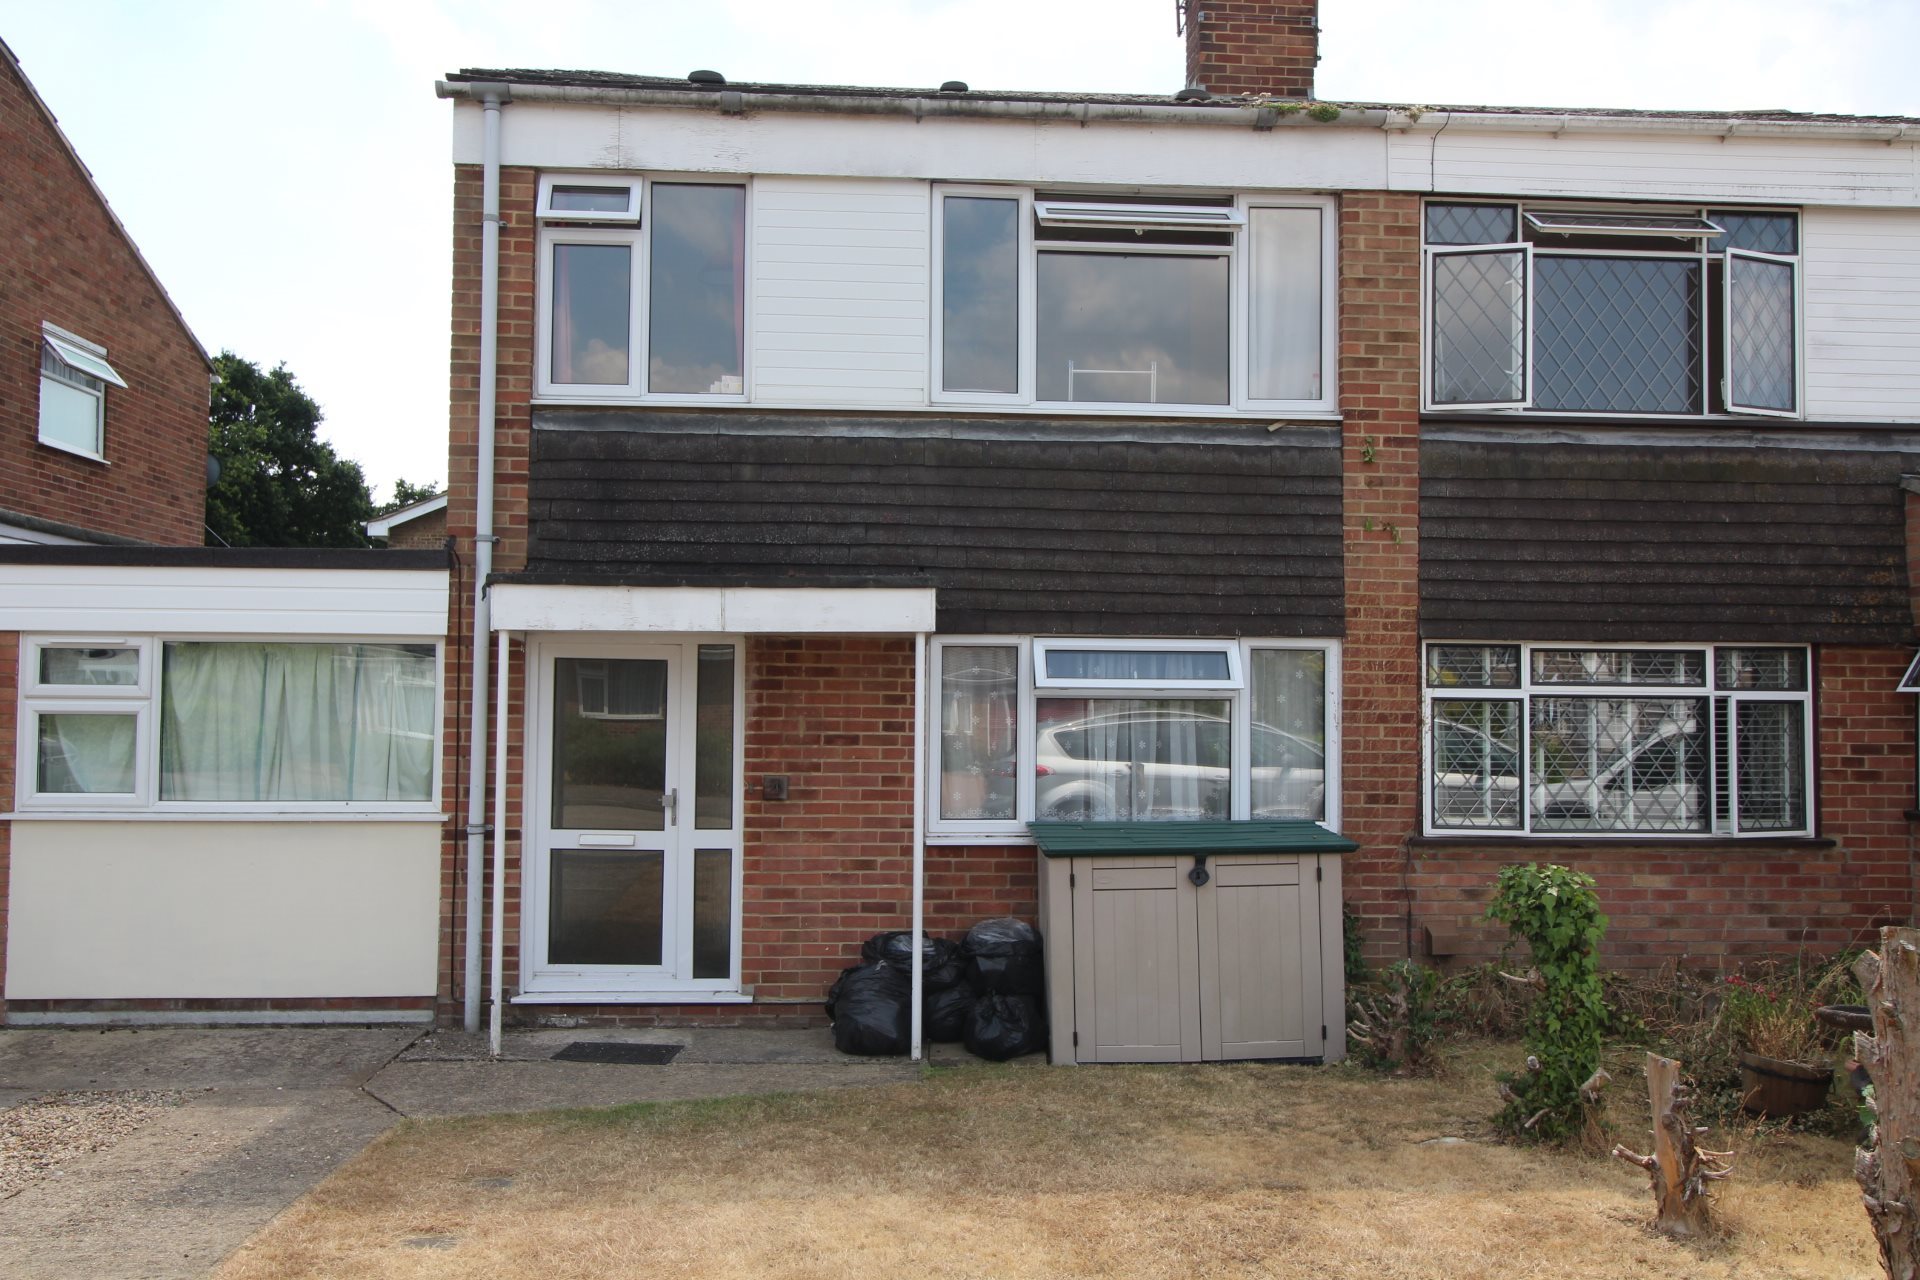 1 bed house / flat share to rent in Petworth Close, Wivenhoe, CO7 